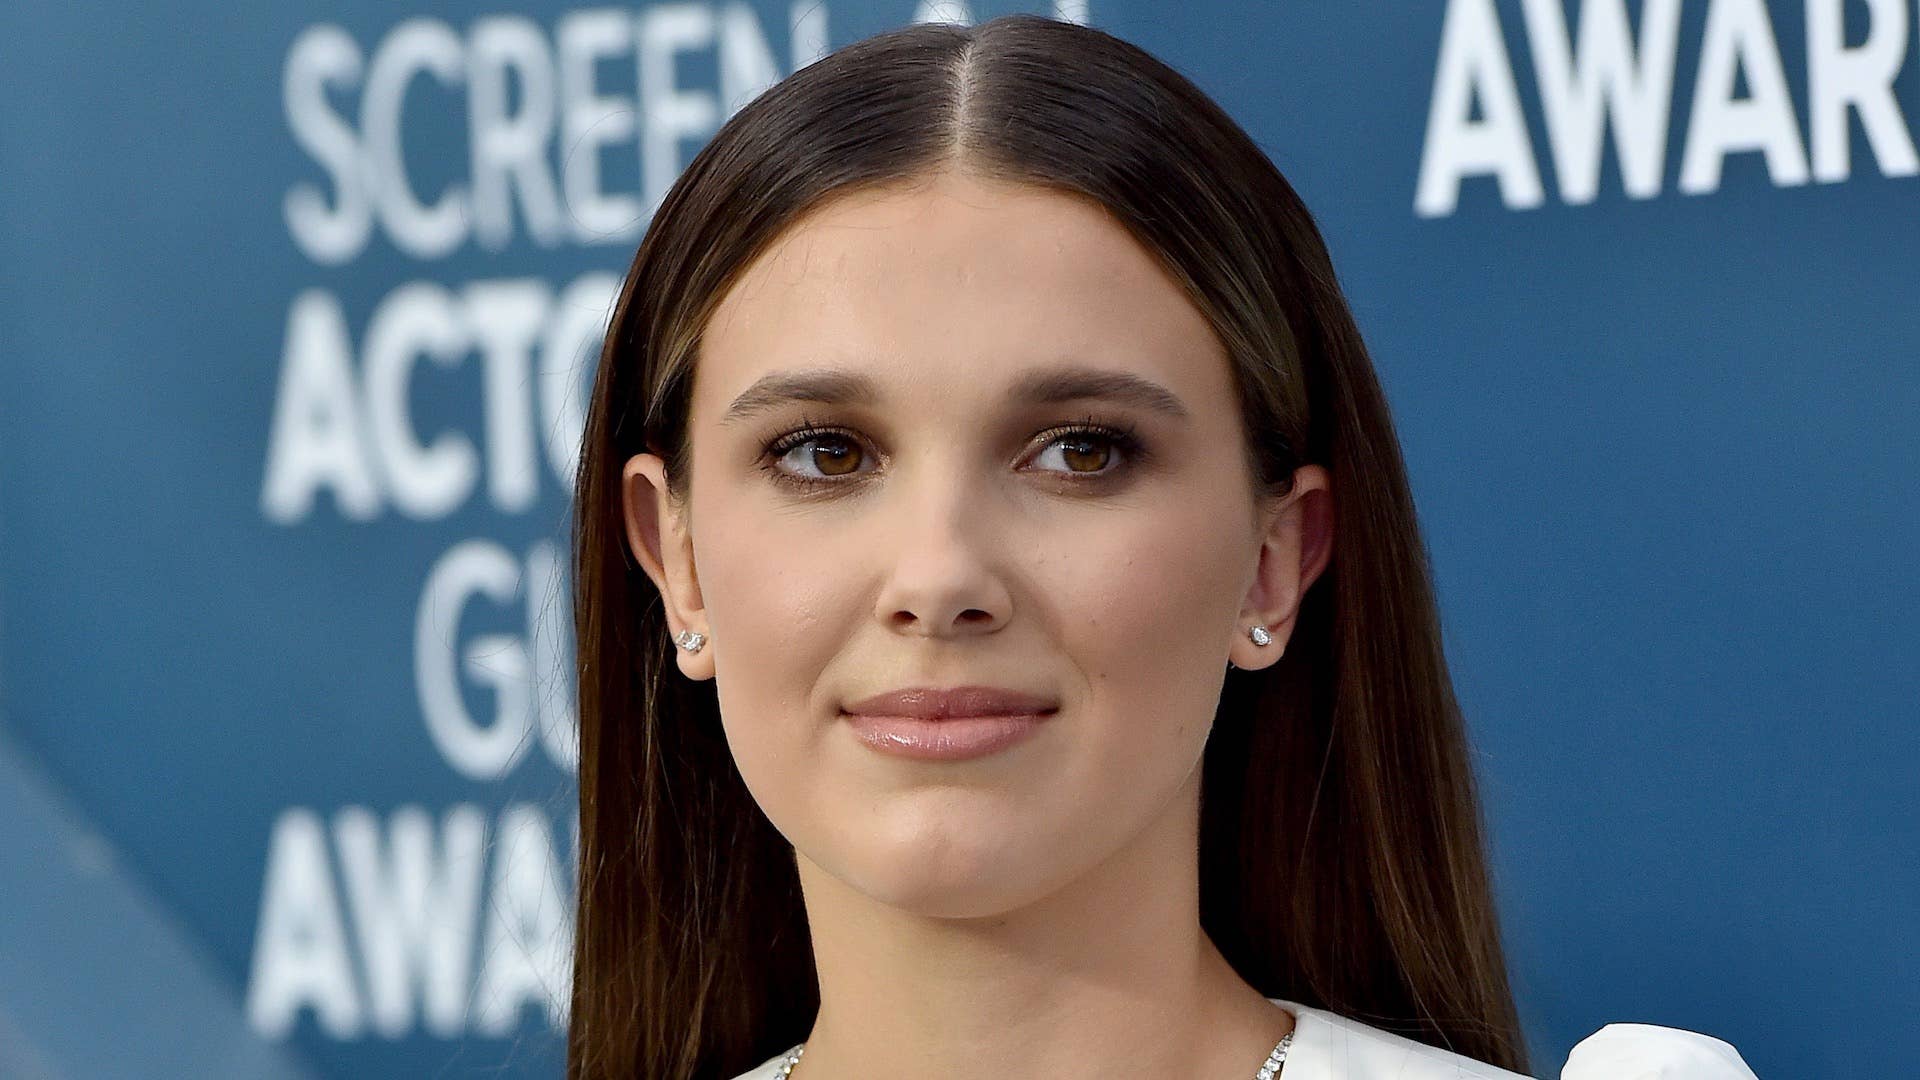 Stranger Things' actress Millie Bobby Brown says she attends